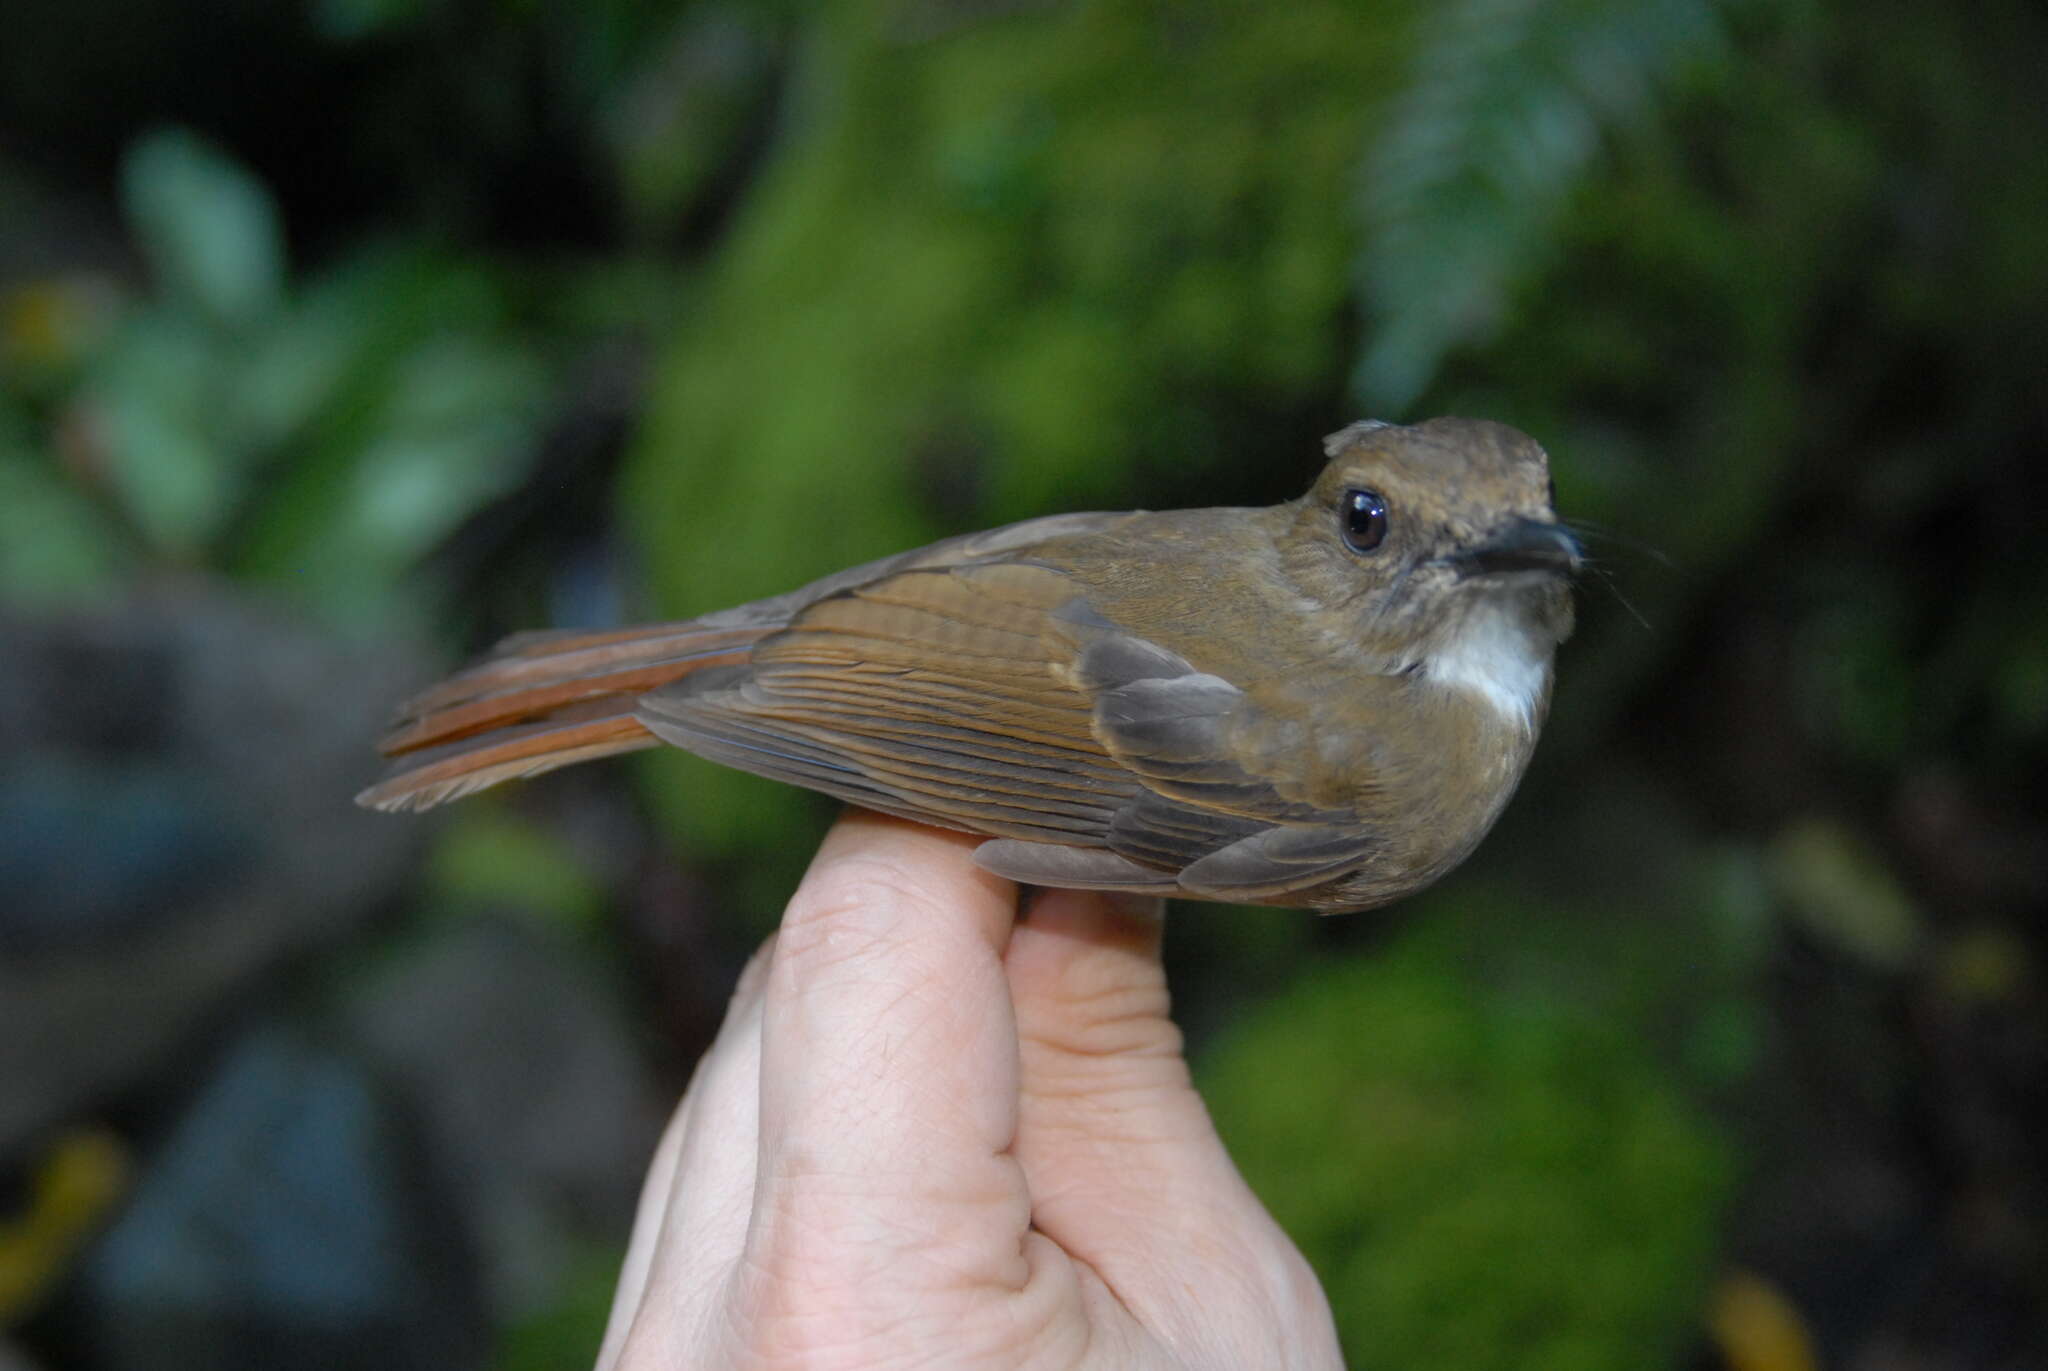 Image of White-throated Jungle Flycatcher